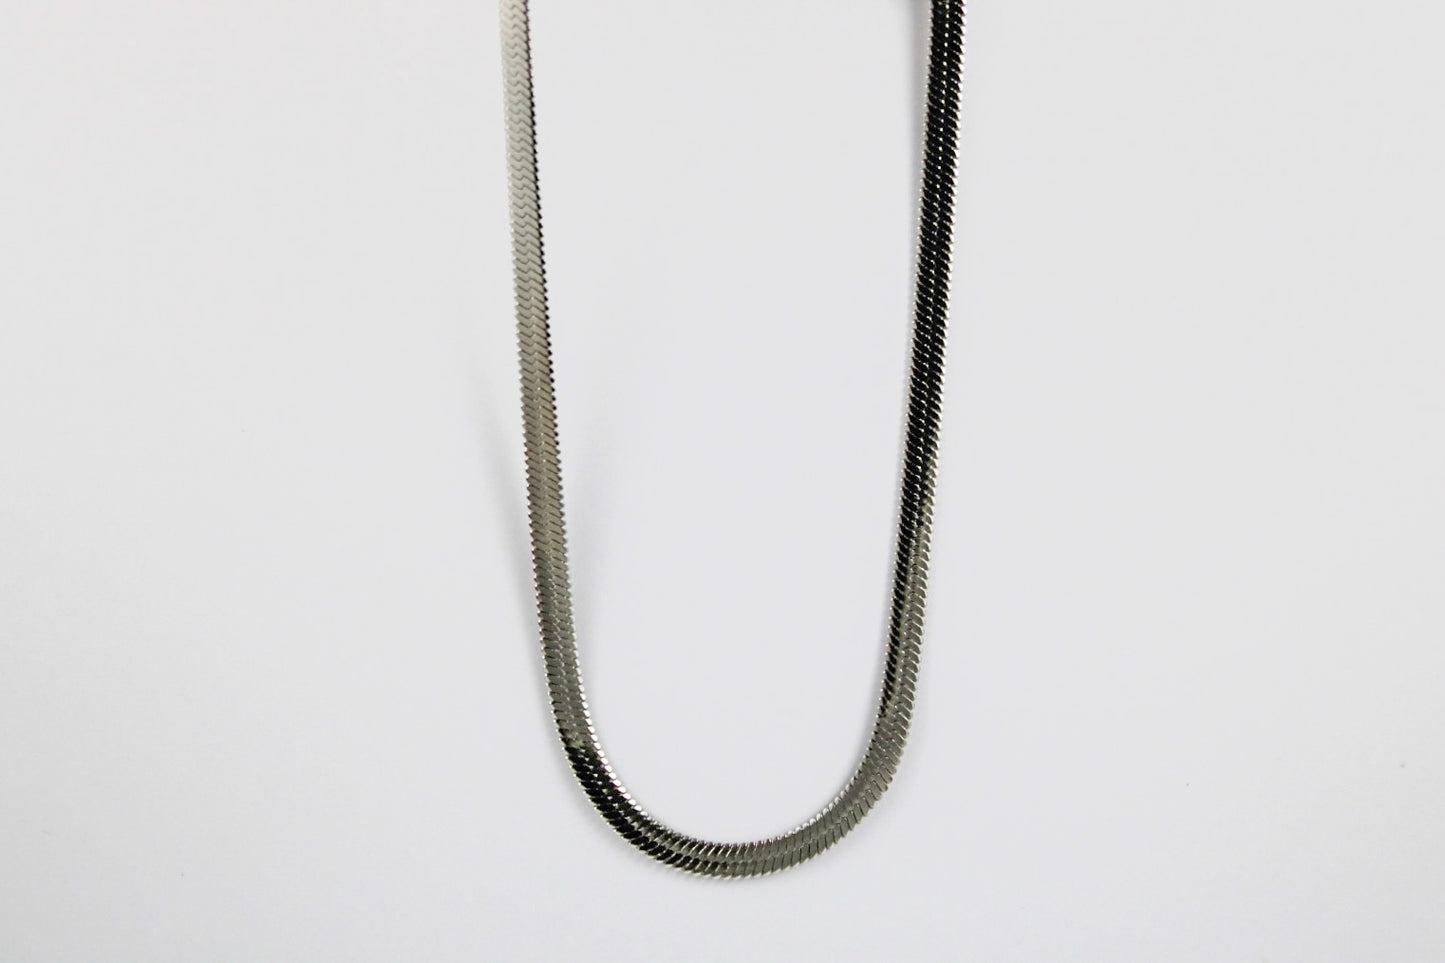 5mm silver snake chain